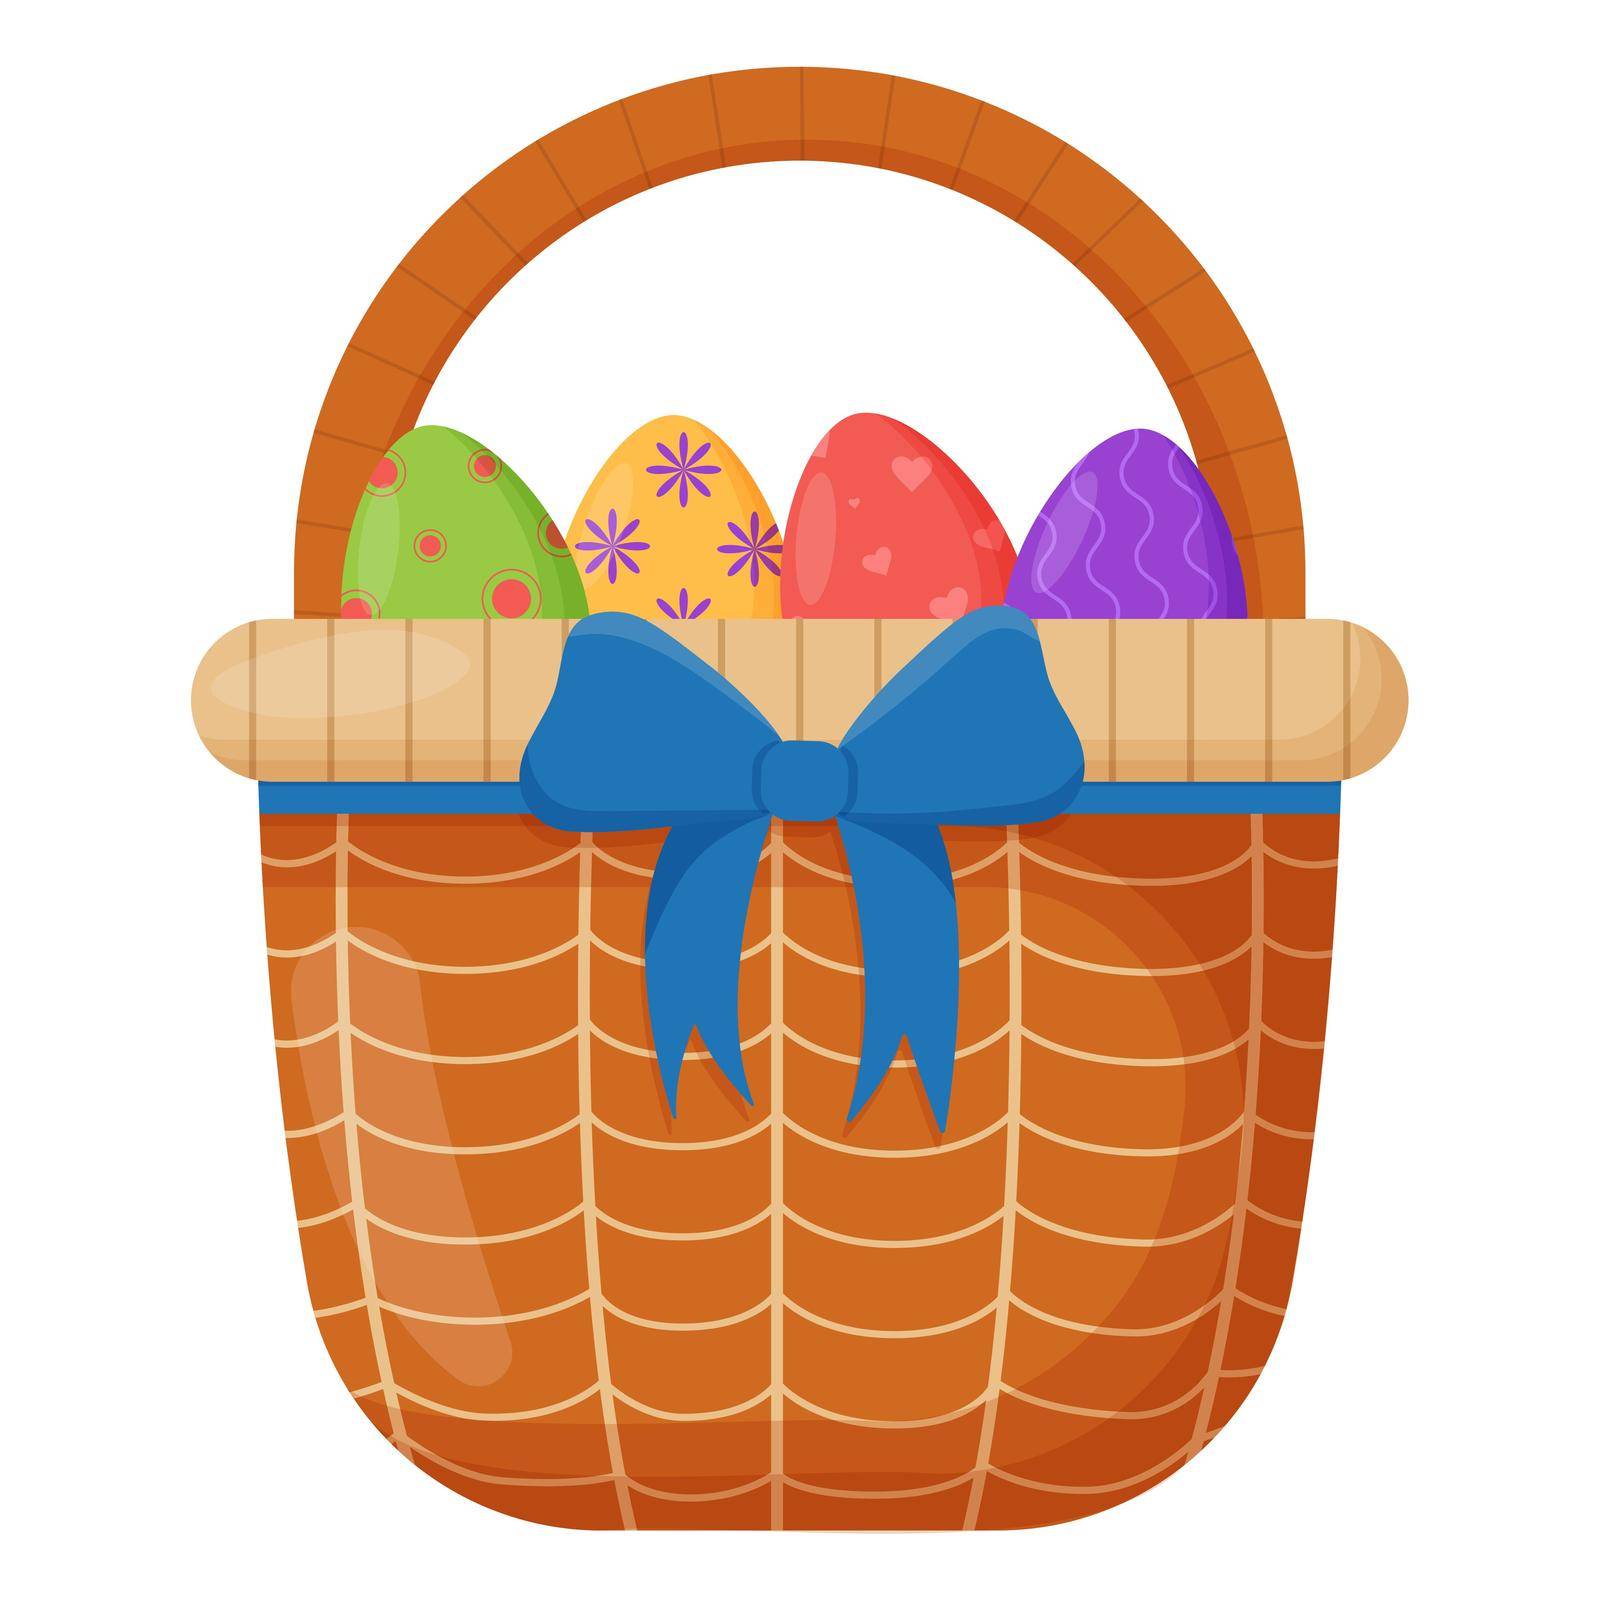 Wicker basket. Wicker basket with Easter eggs for Easter. Wooden accessory for storage or carrying.